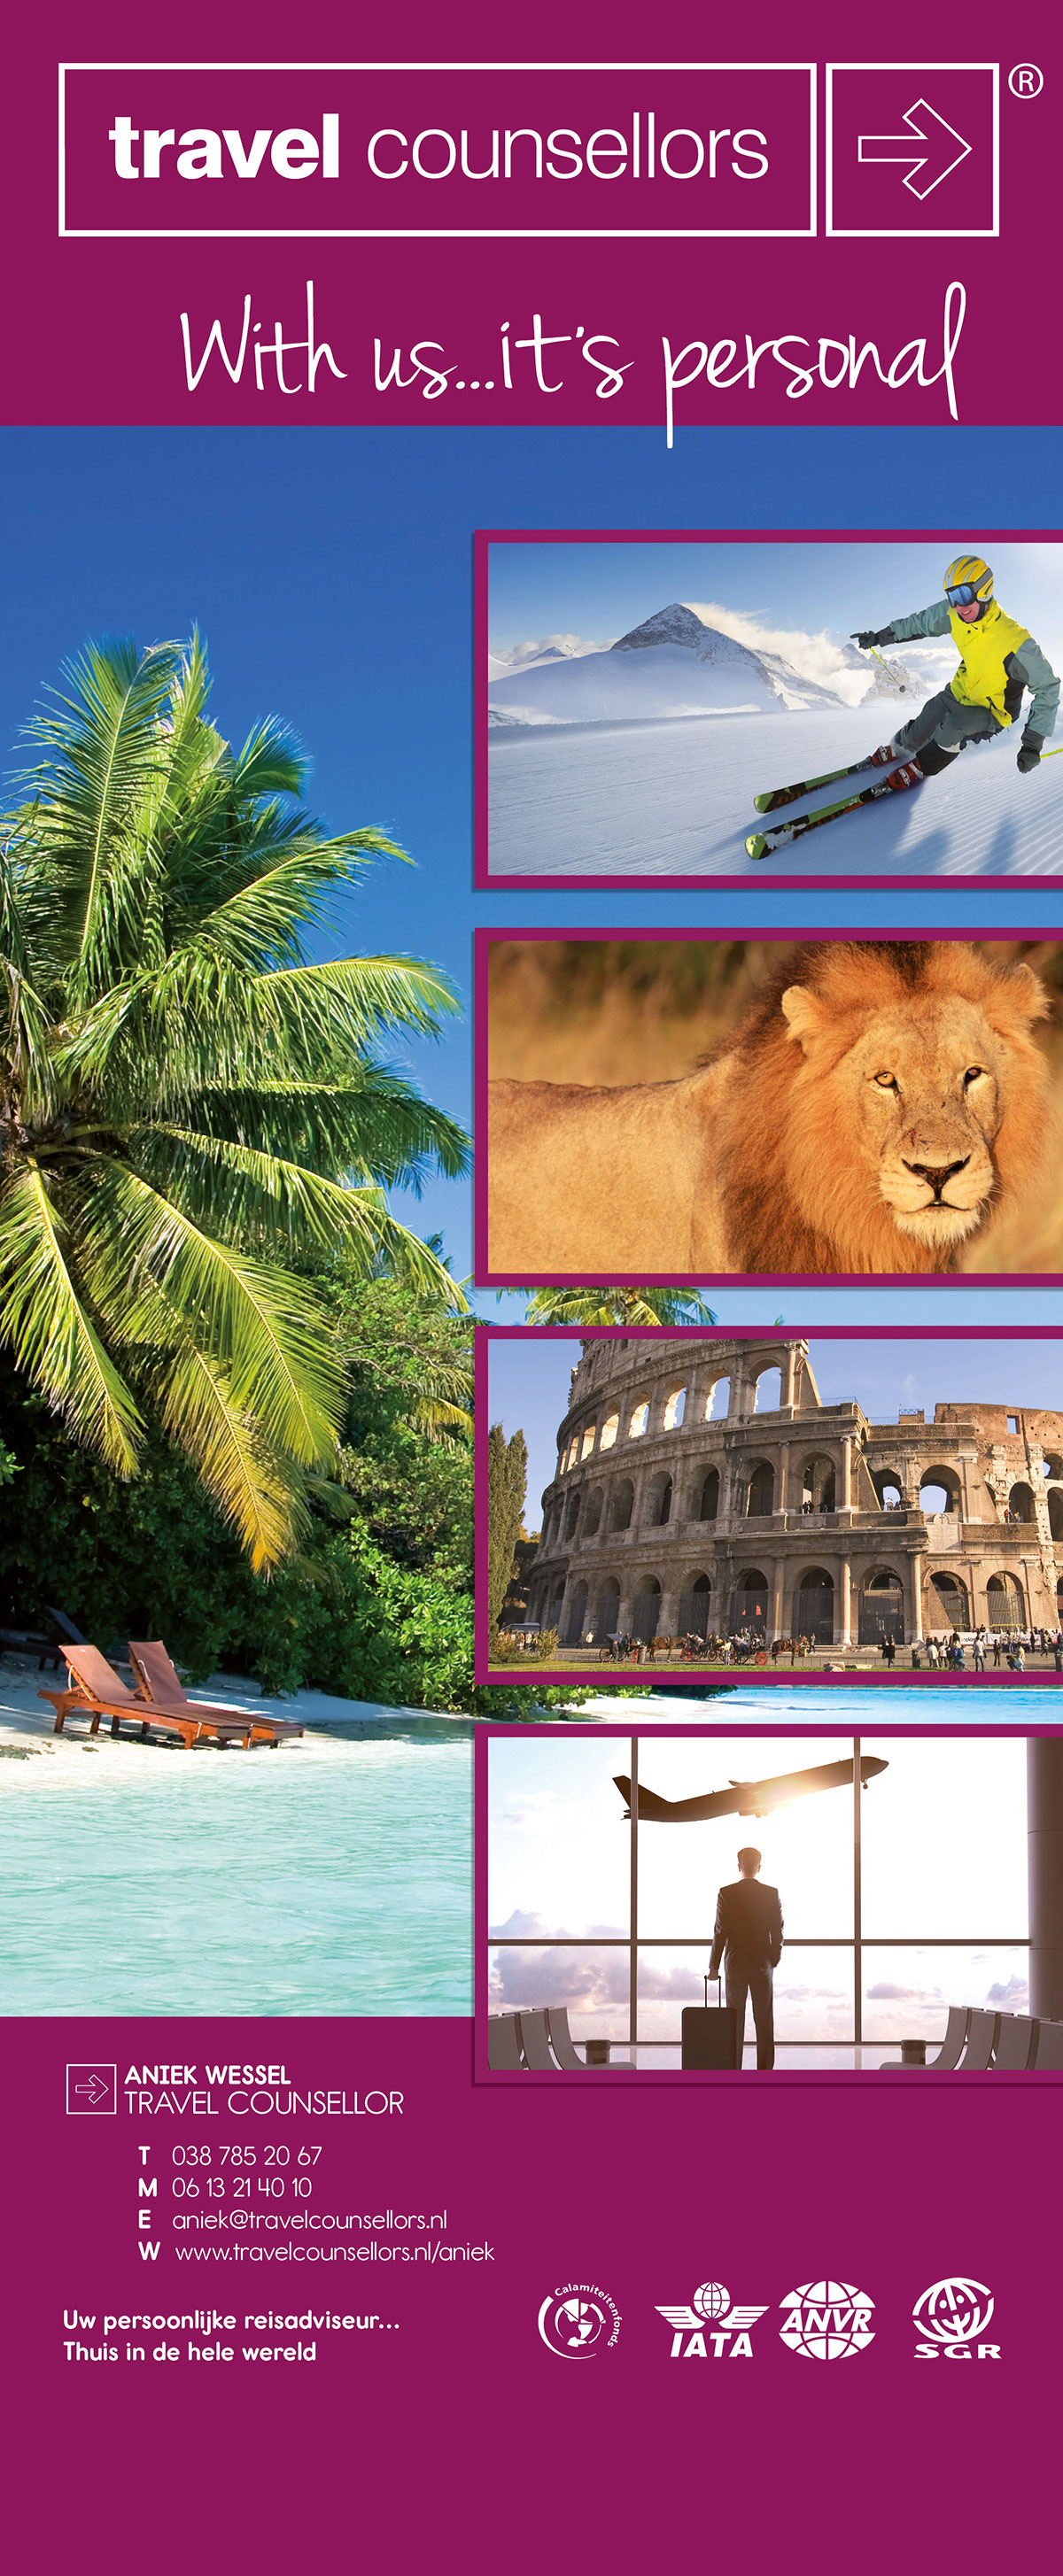 travel counsellors offers